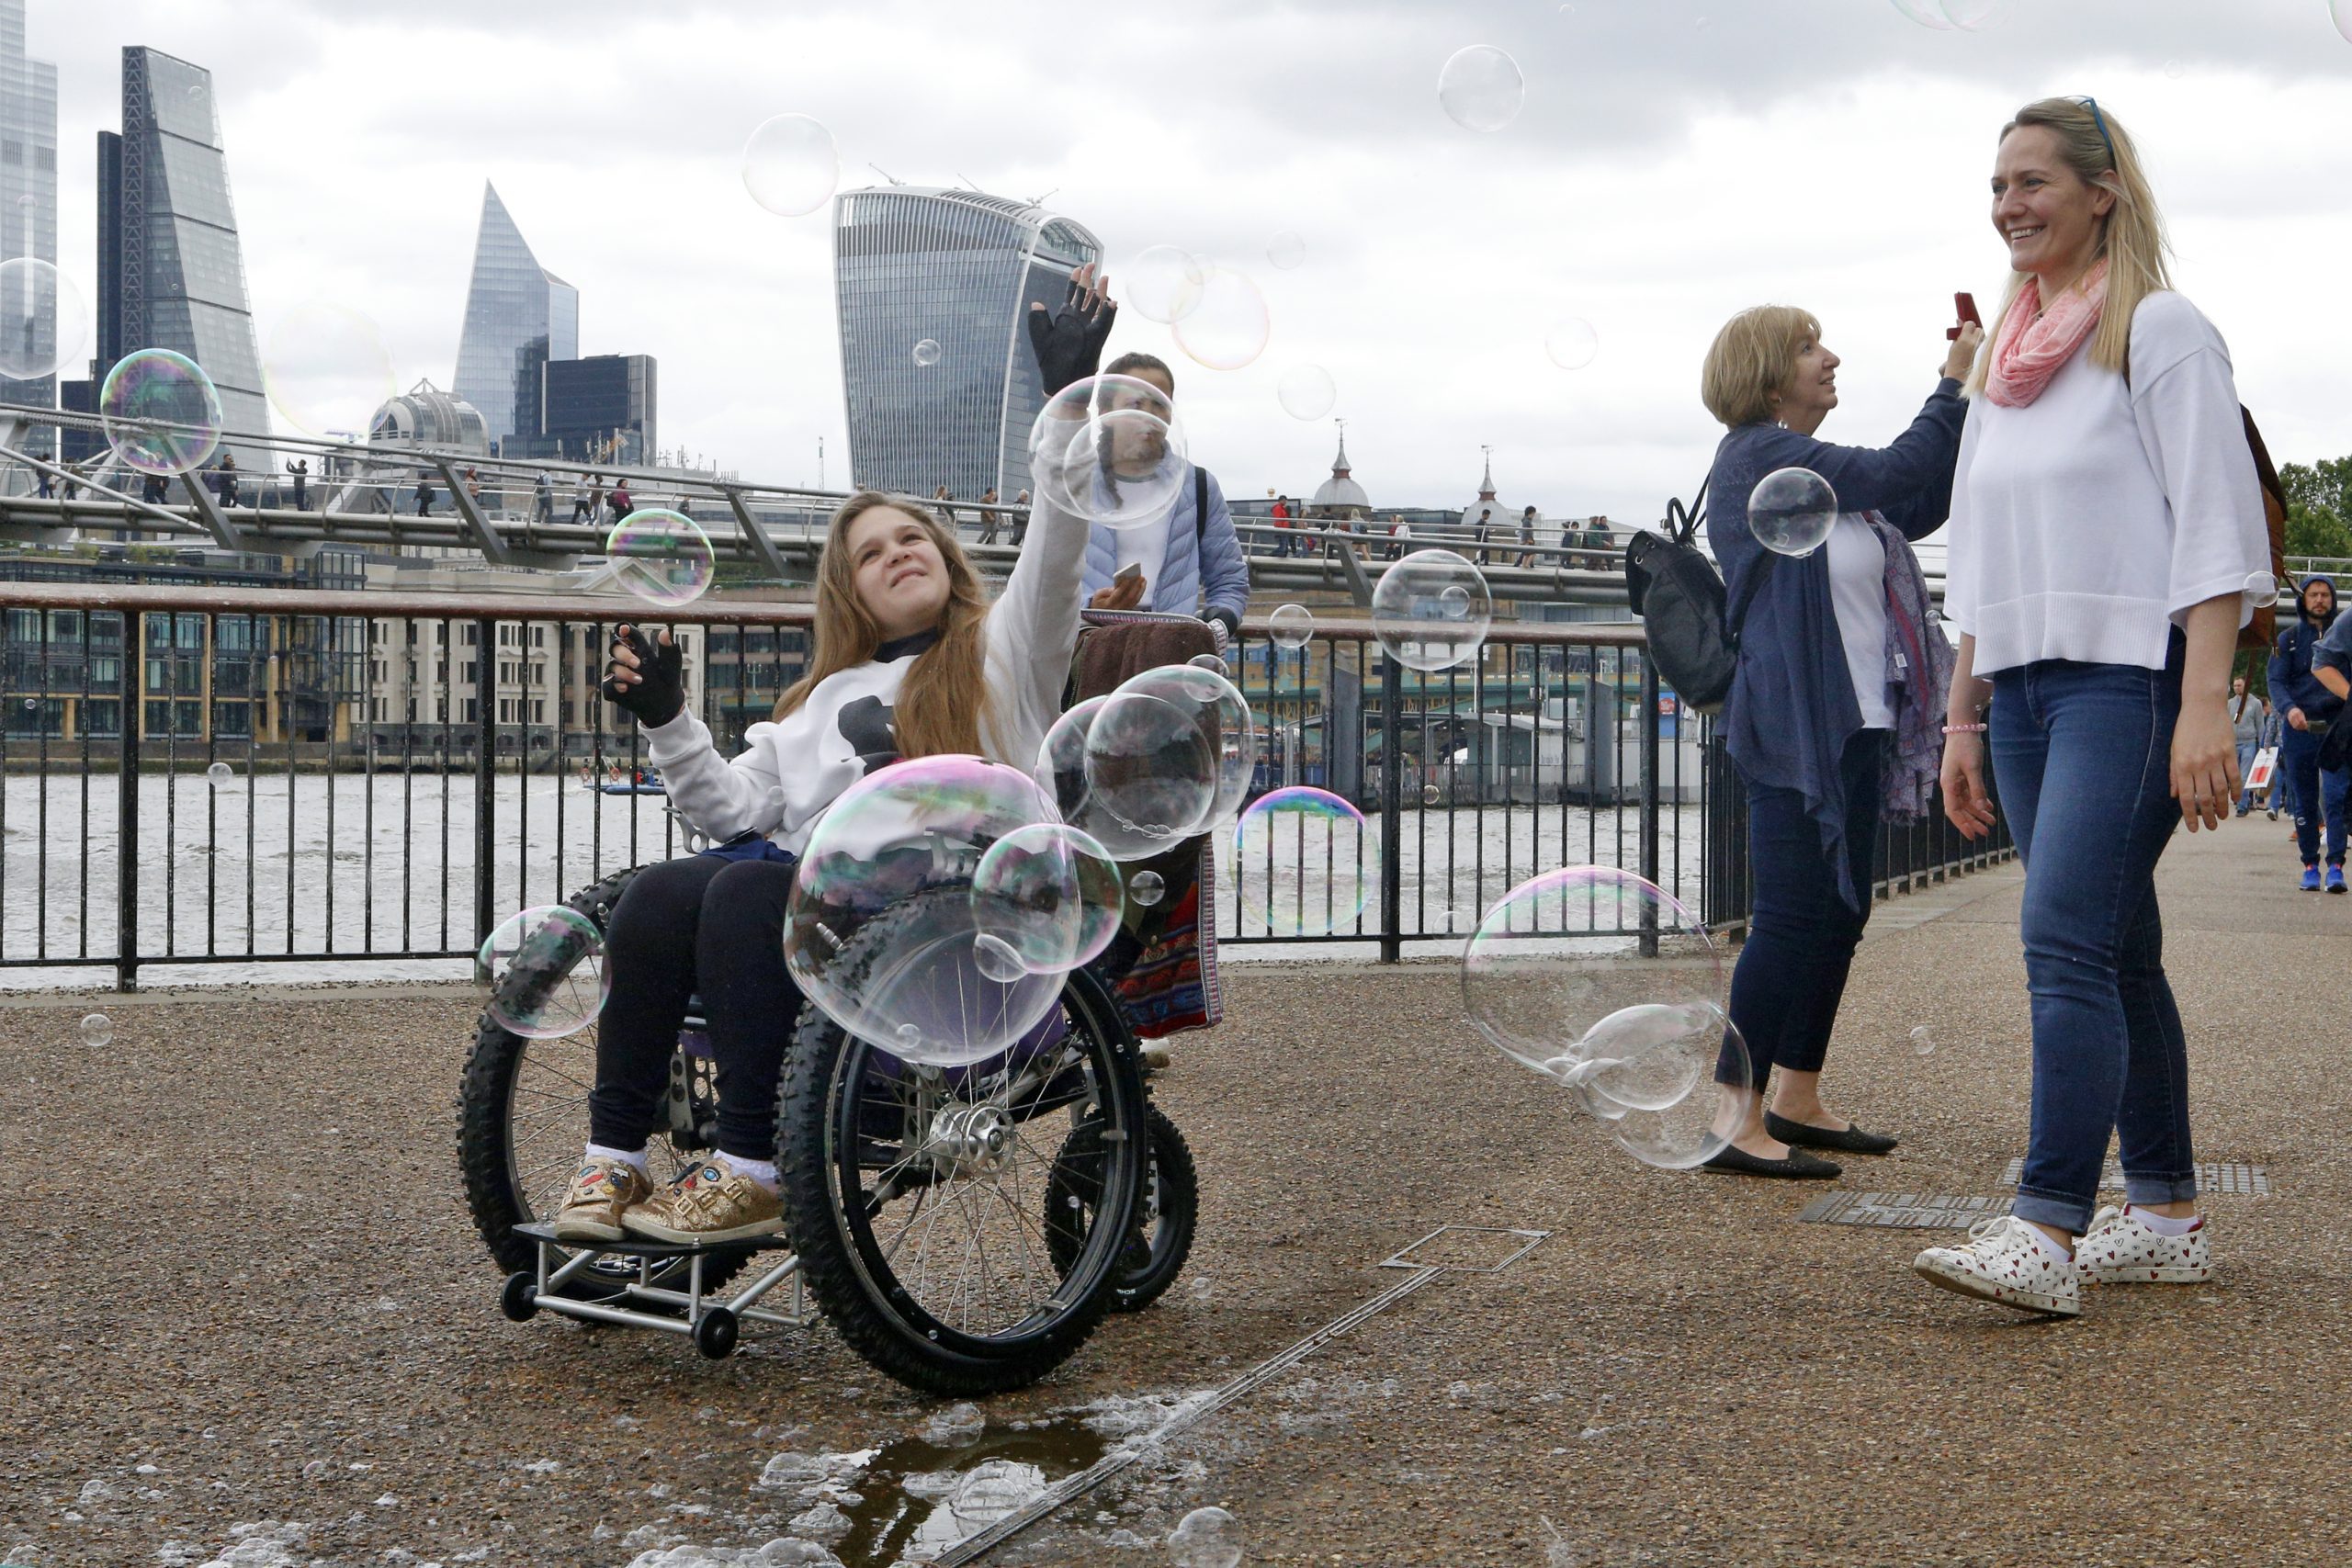 A woman in a wheelchair is enjoying a day out in Embankment, London, with friends